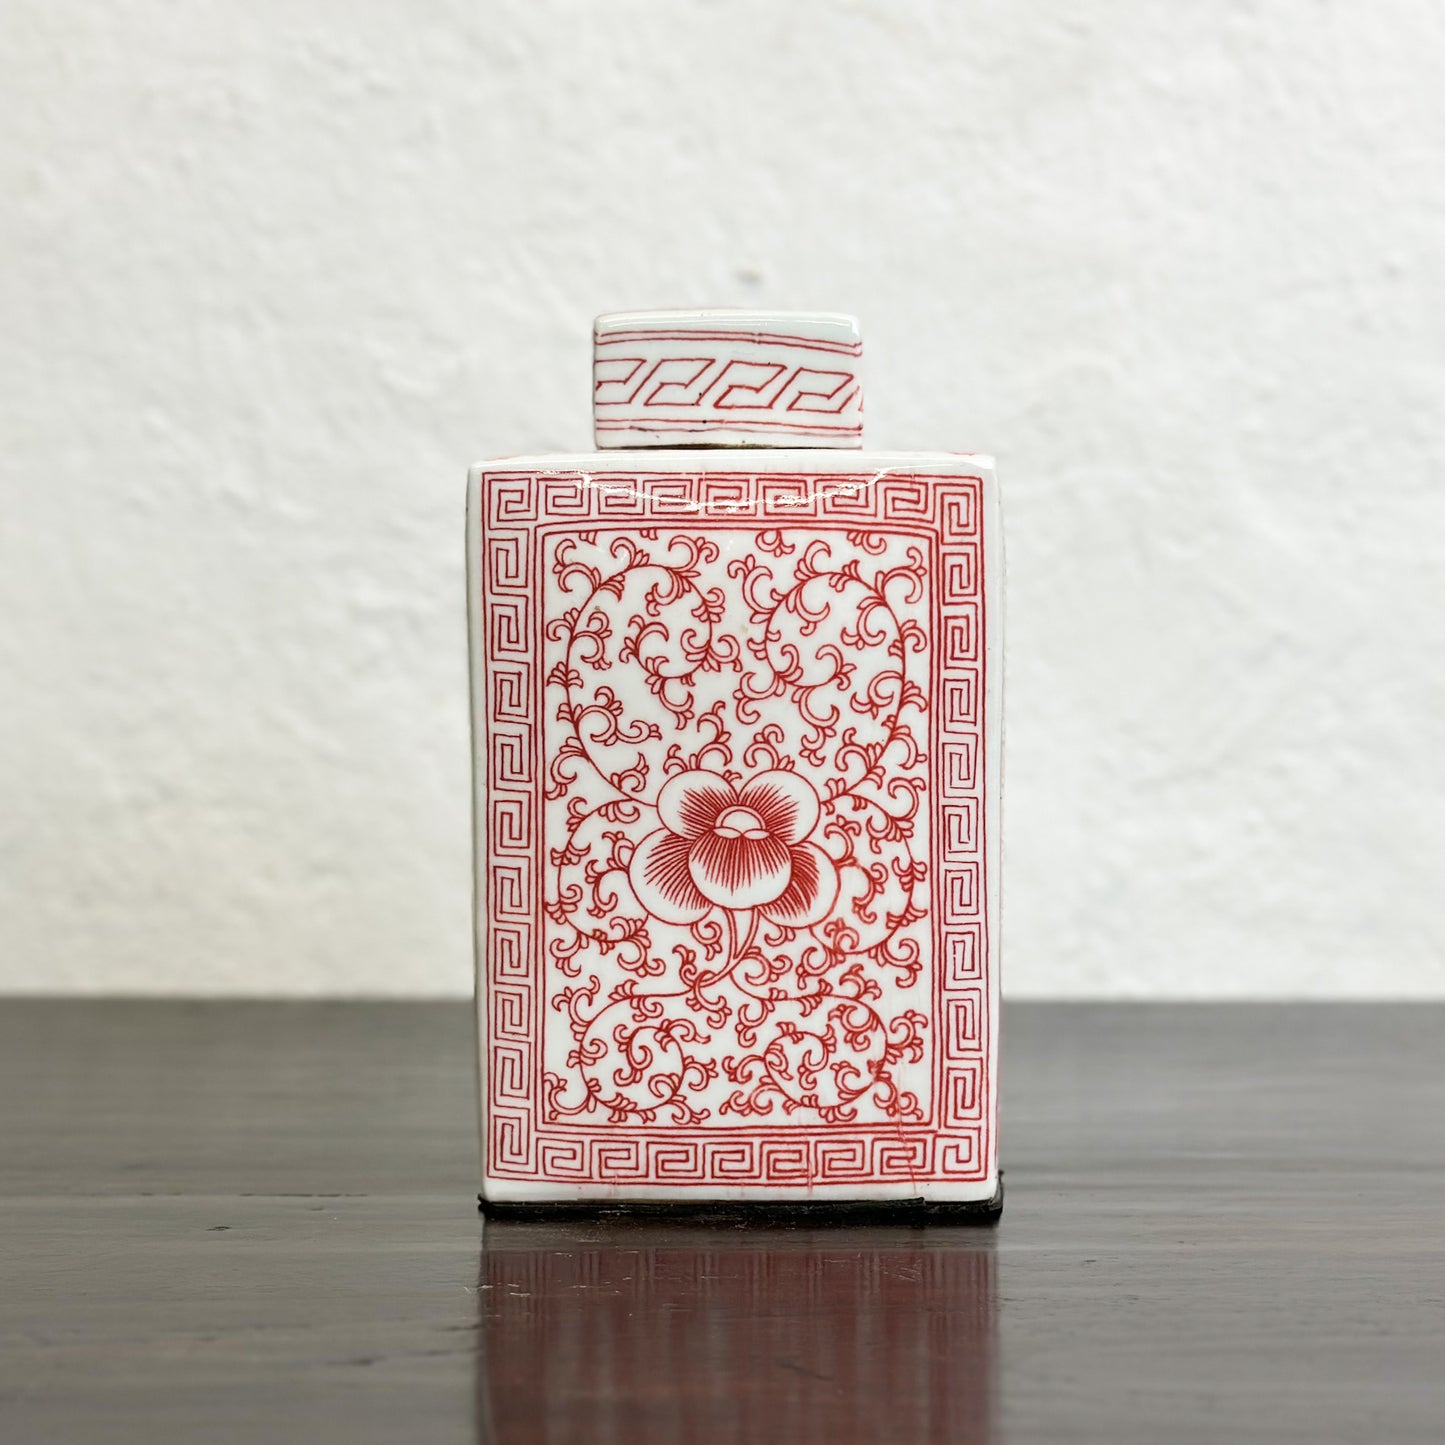 Chinese-Porcelain-Square-Tea-Container-Vermillion-Red-and-White-Prunus-Flower-Vines1